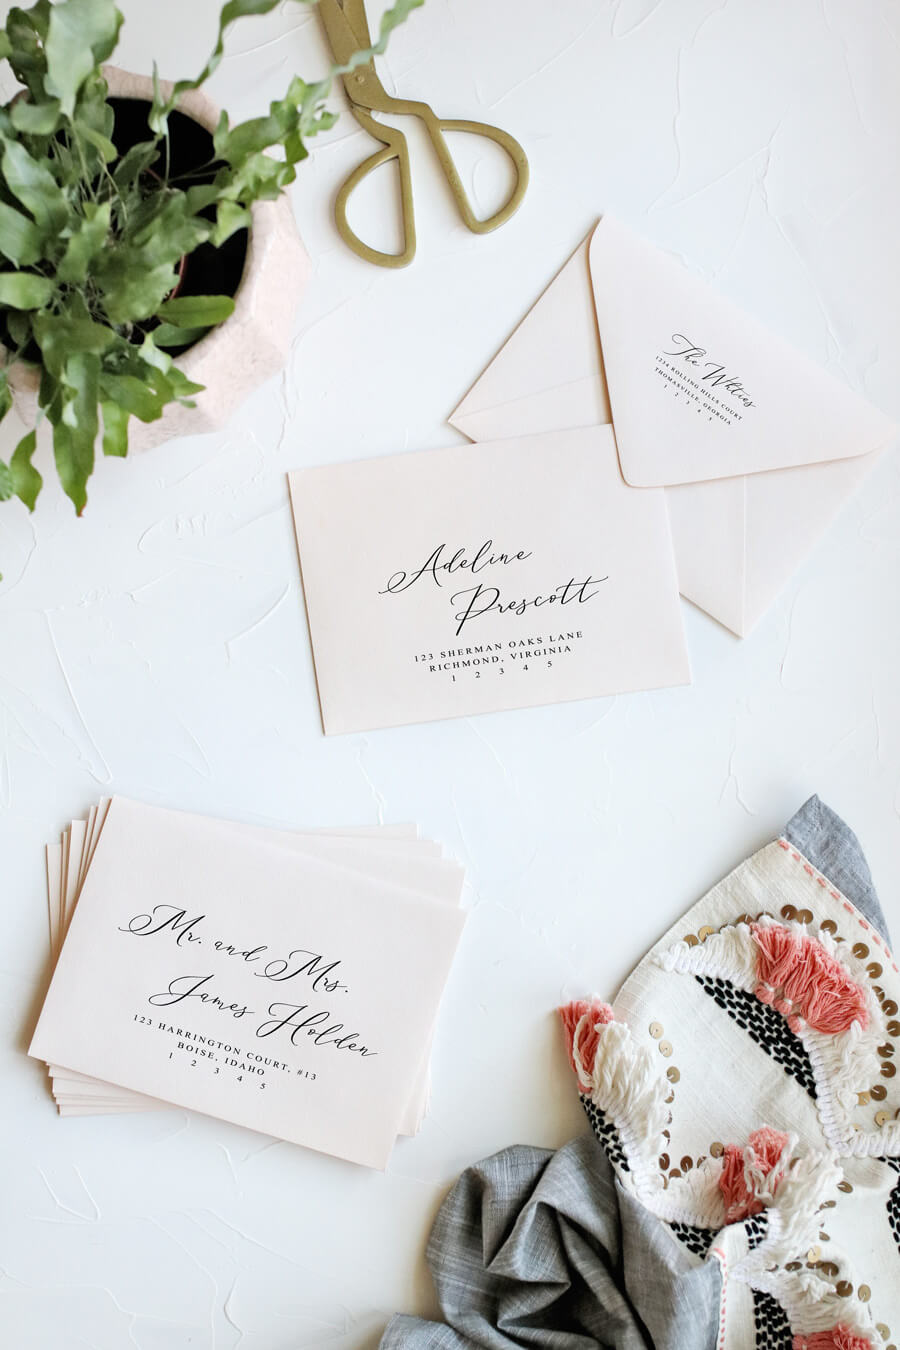 How To Print Envelopes The Easy Way | Pipkin Paper Company Within Paper Source Templates Place Cards